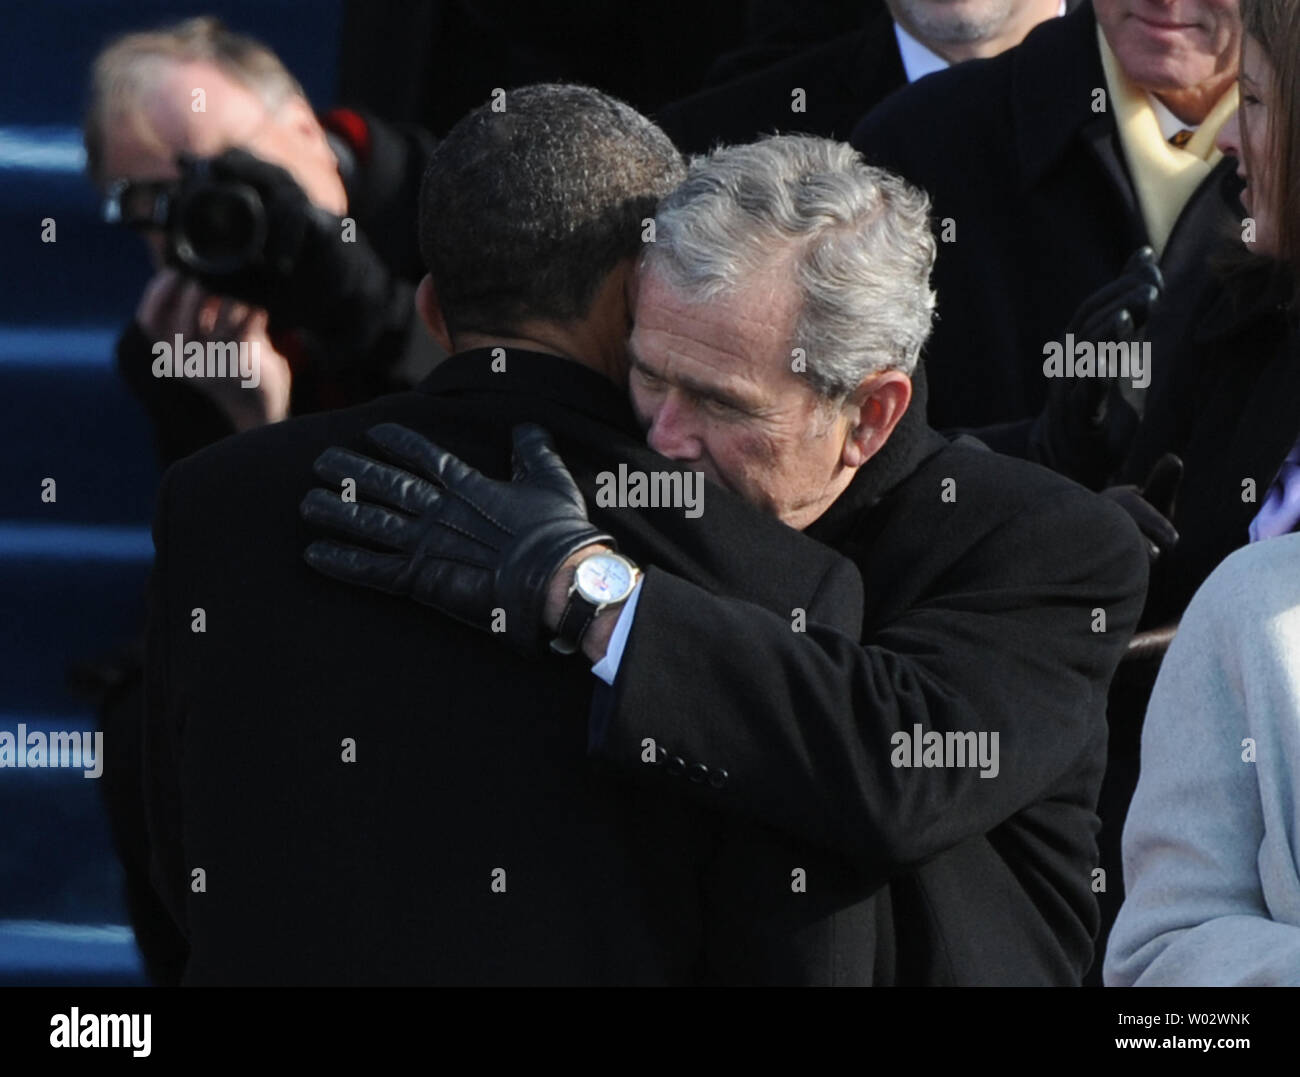 President Barack Obama (L) is hugged by former President George W. Bush after Obama was sworn-in as the 44th President of the United States on the west steps of the Capitol on January 20, 2009.  UPI/Pat Benic Stock Photo